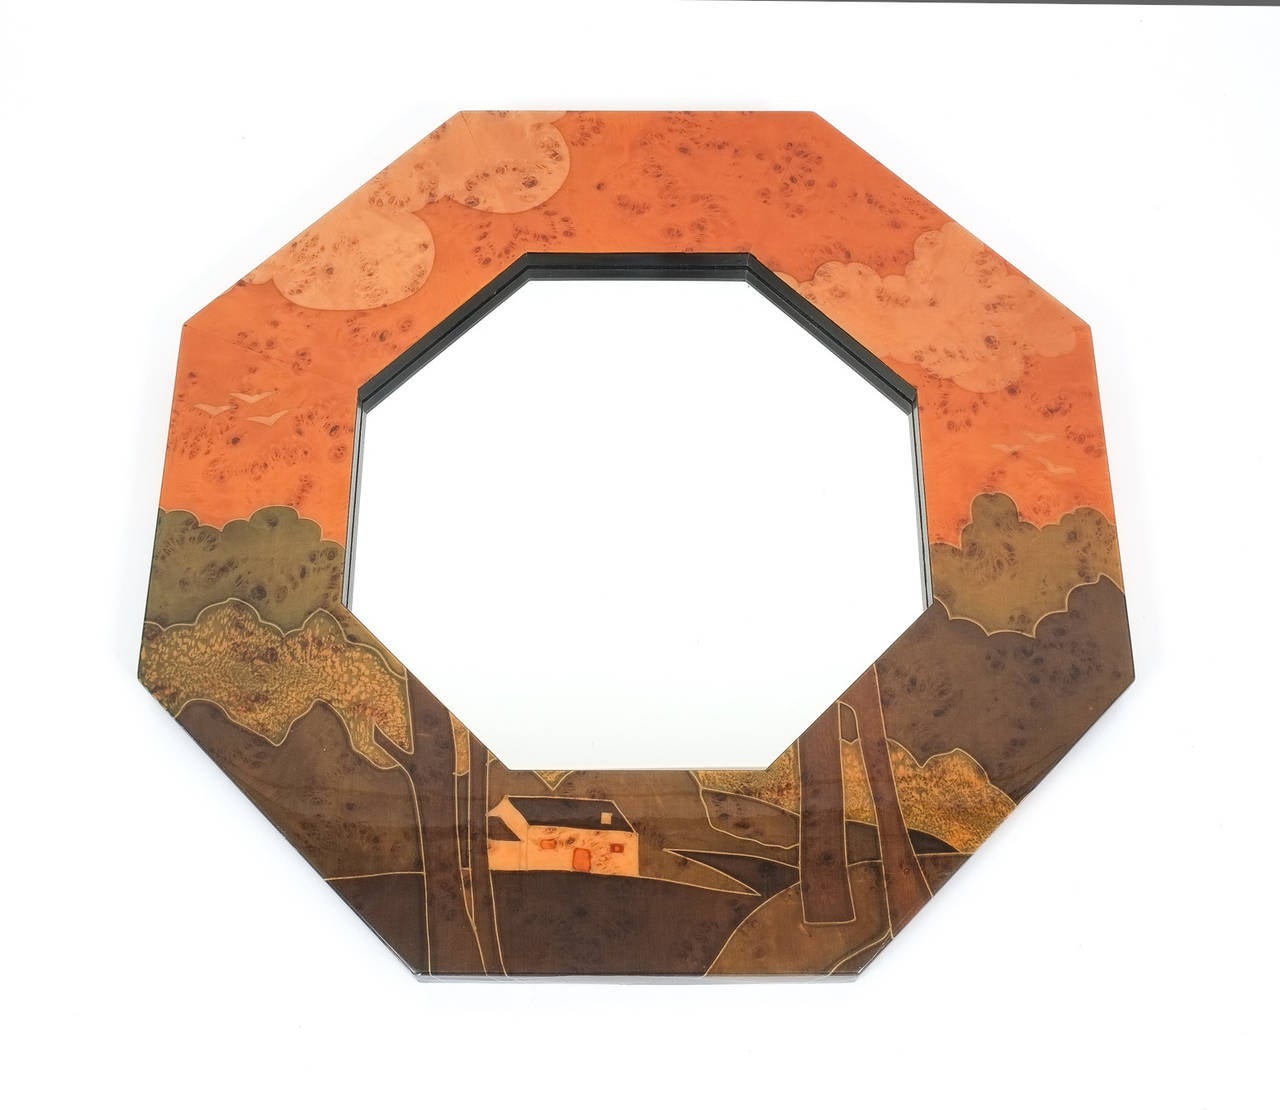 Jean Claude Mahey Paris octagonal marquetry mirror, 1970 with a total diameter of 28 inches, it's in very good condition.